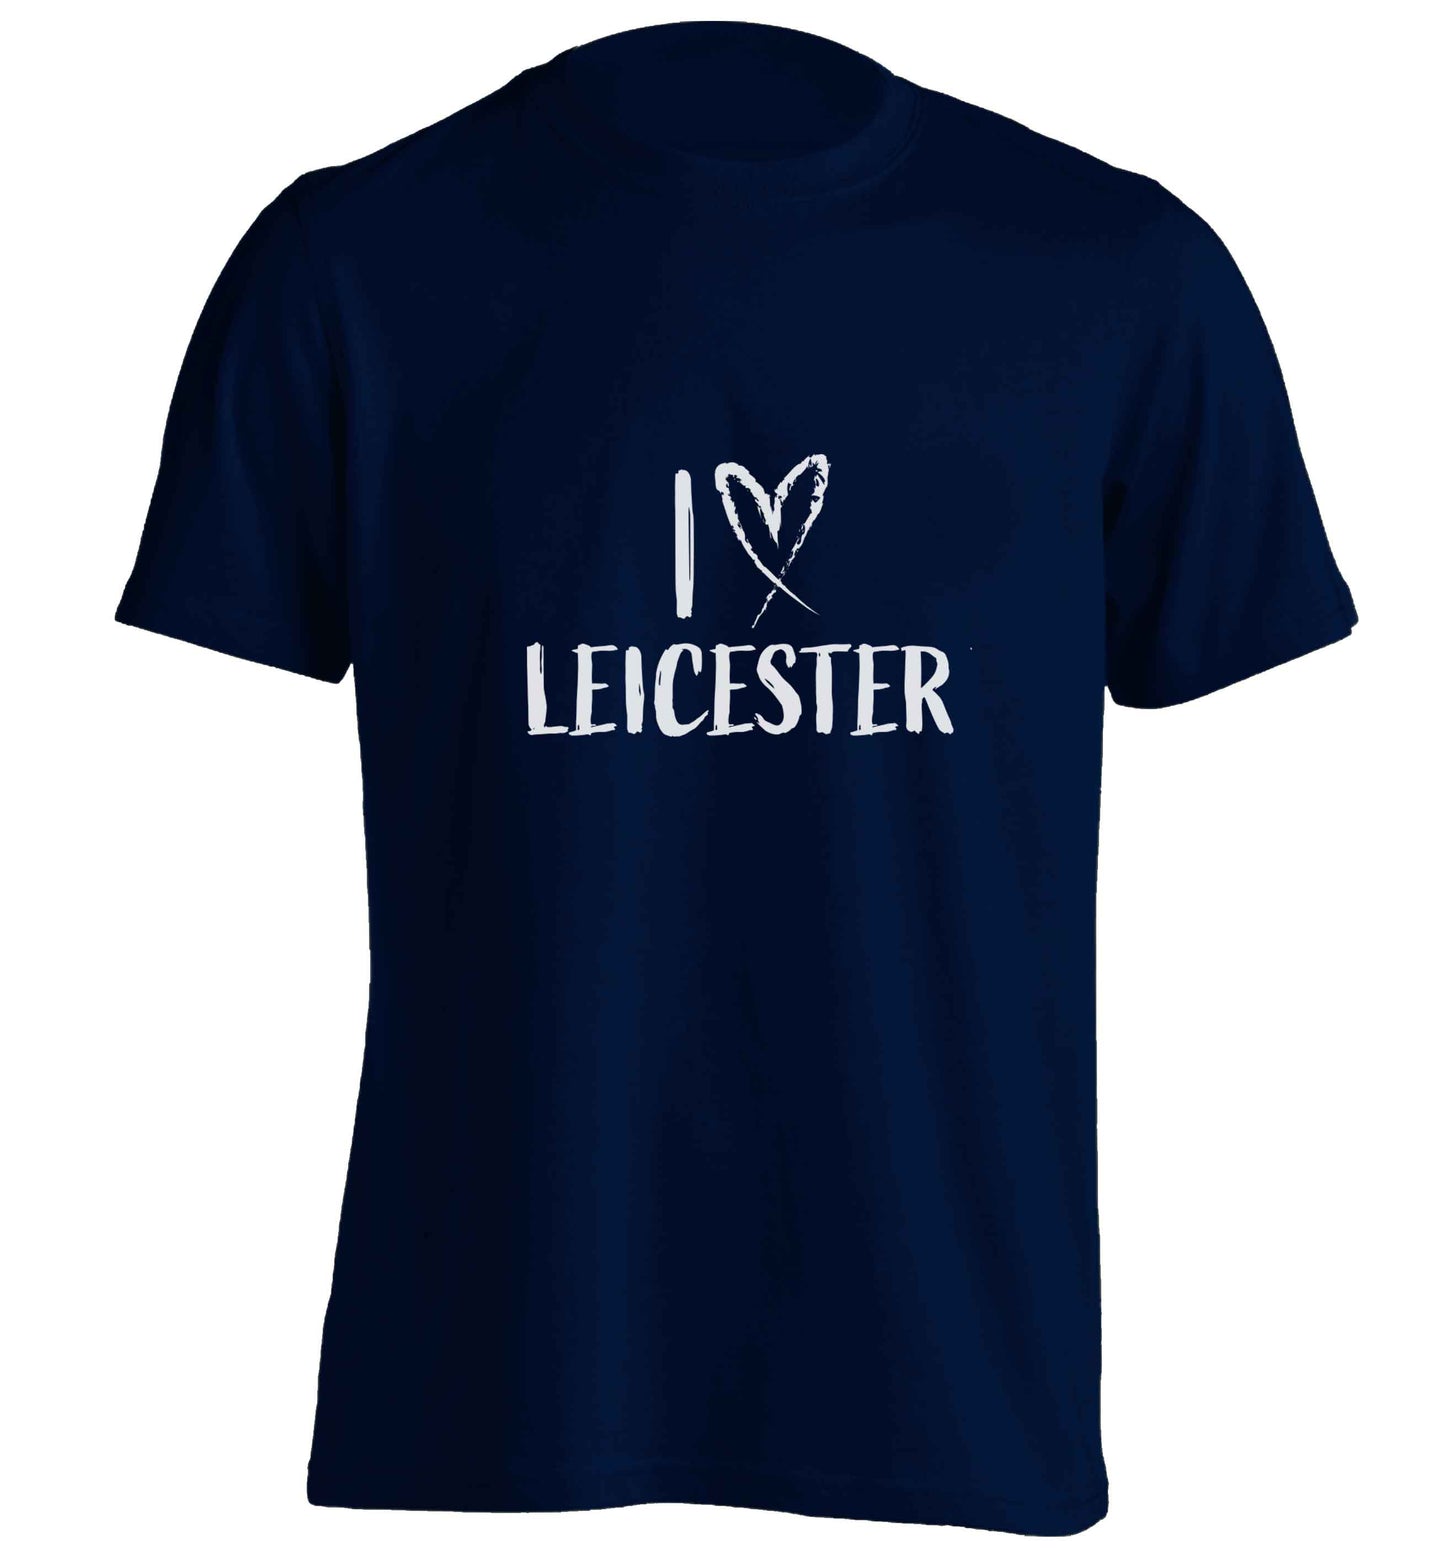 I love Leicester adults unisex navy Tshirt 2XL